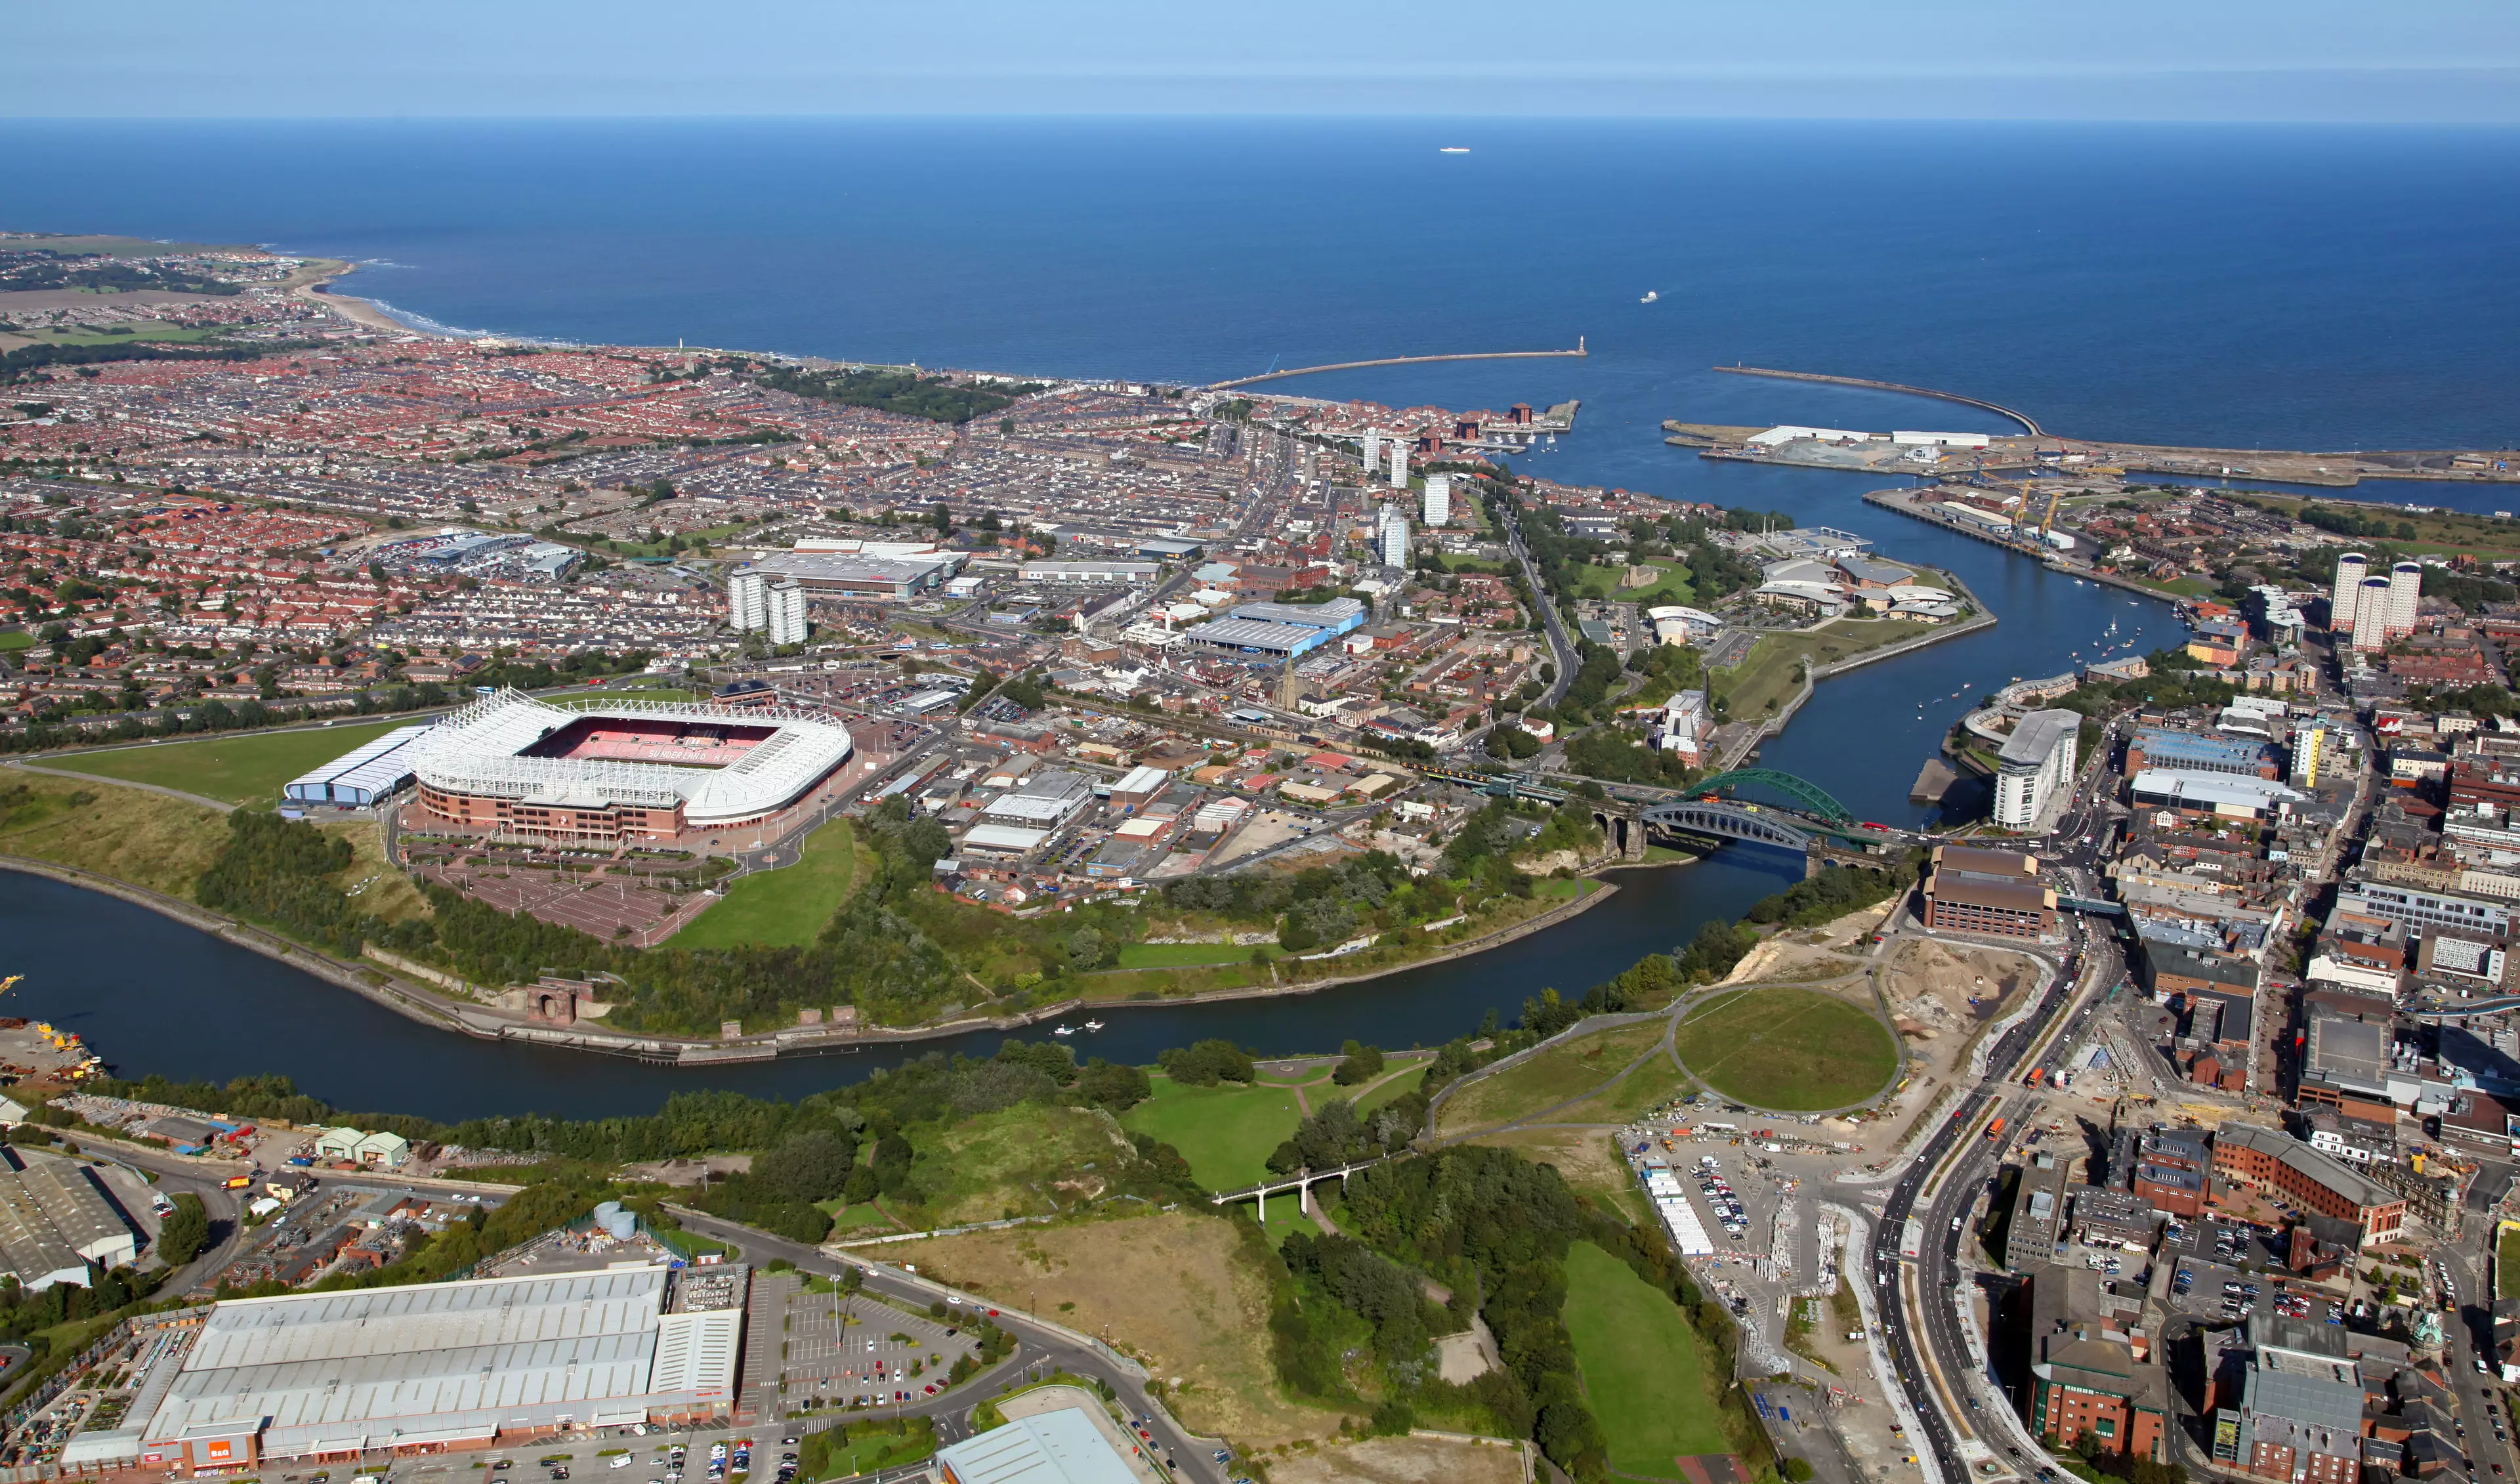 Sunderland was the third cheapest place to buy a property according to the new research.